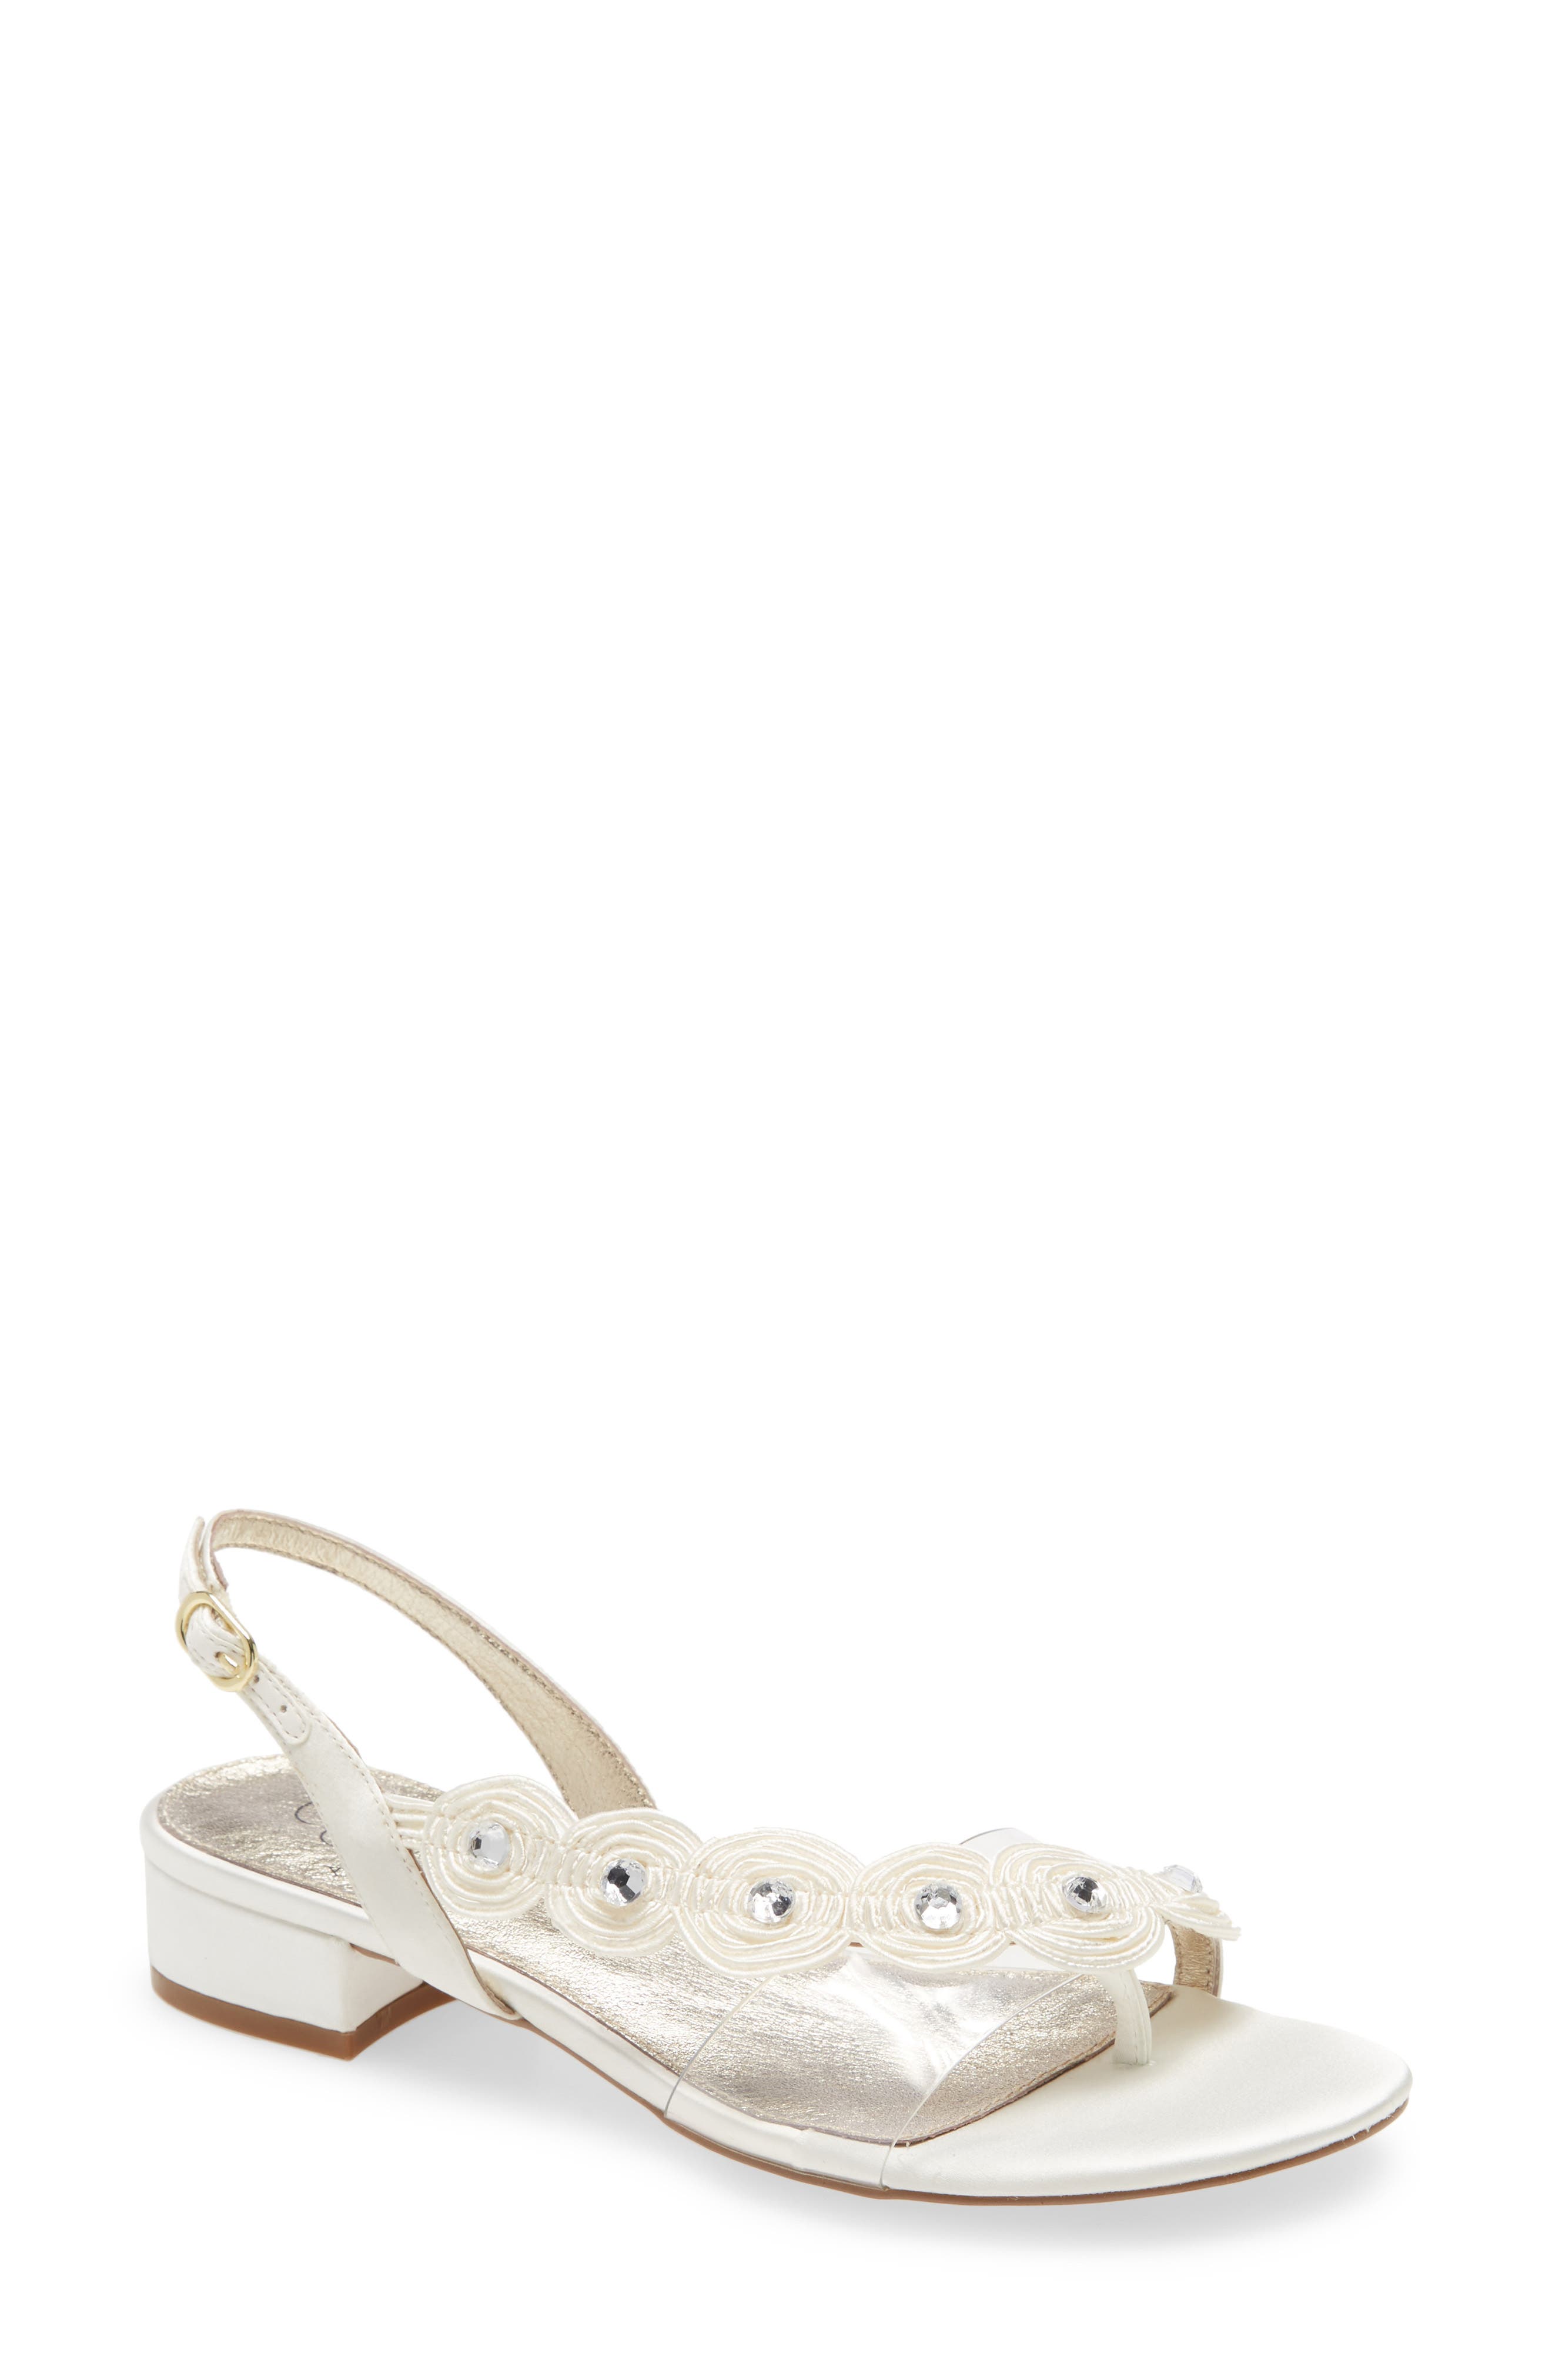 nordstrom adrianna papell shoes